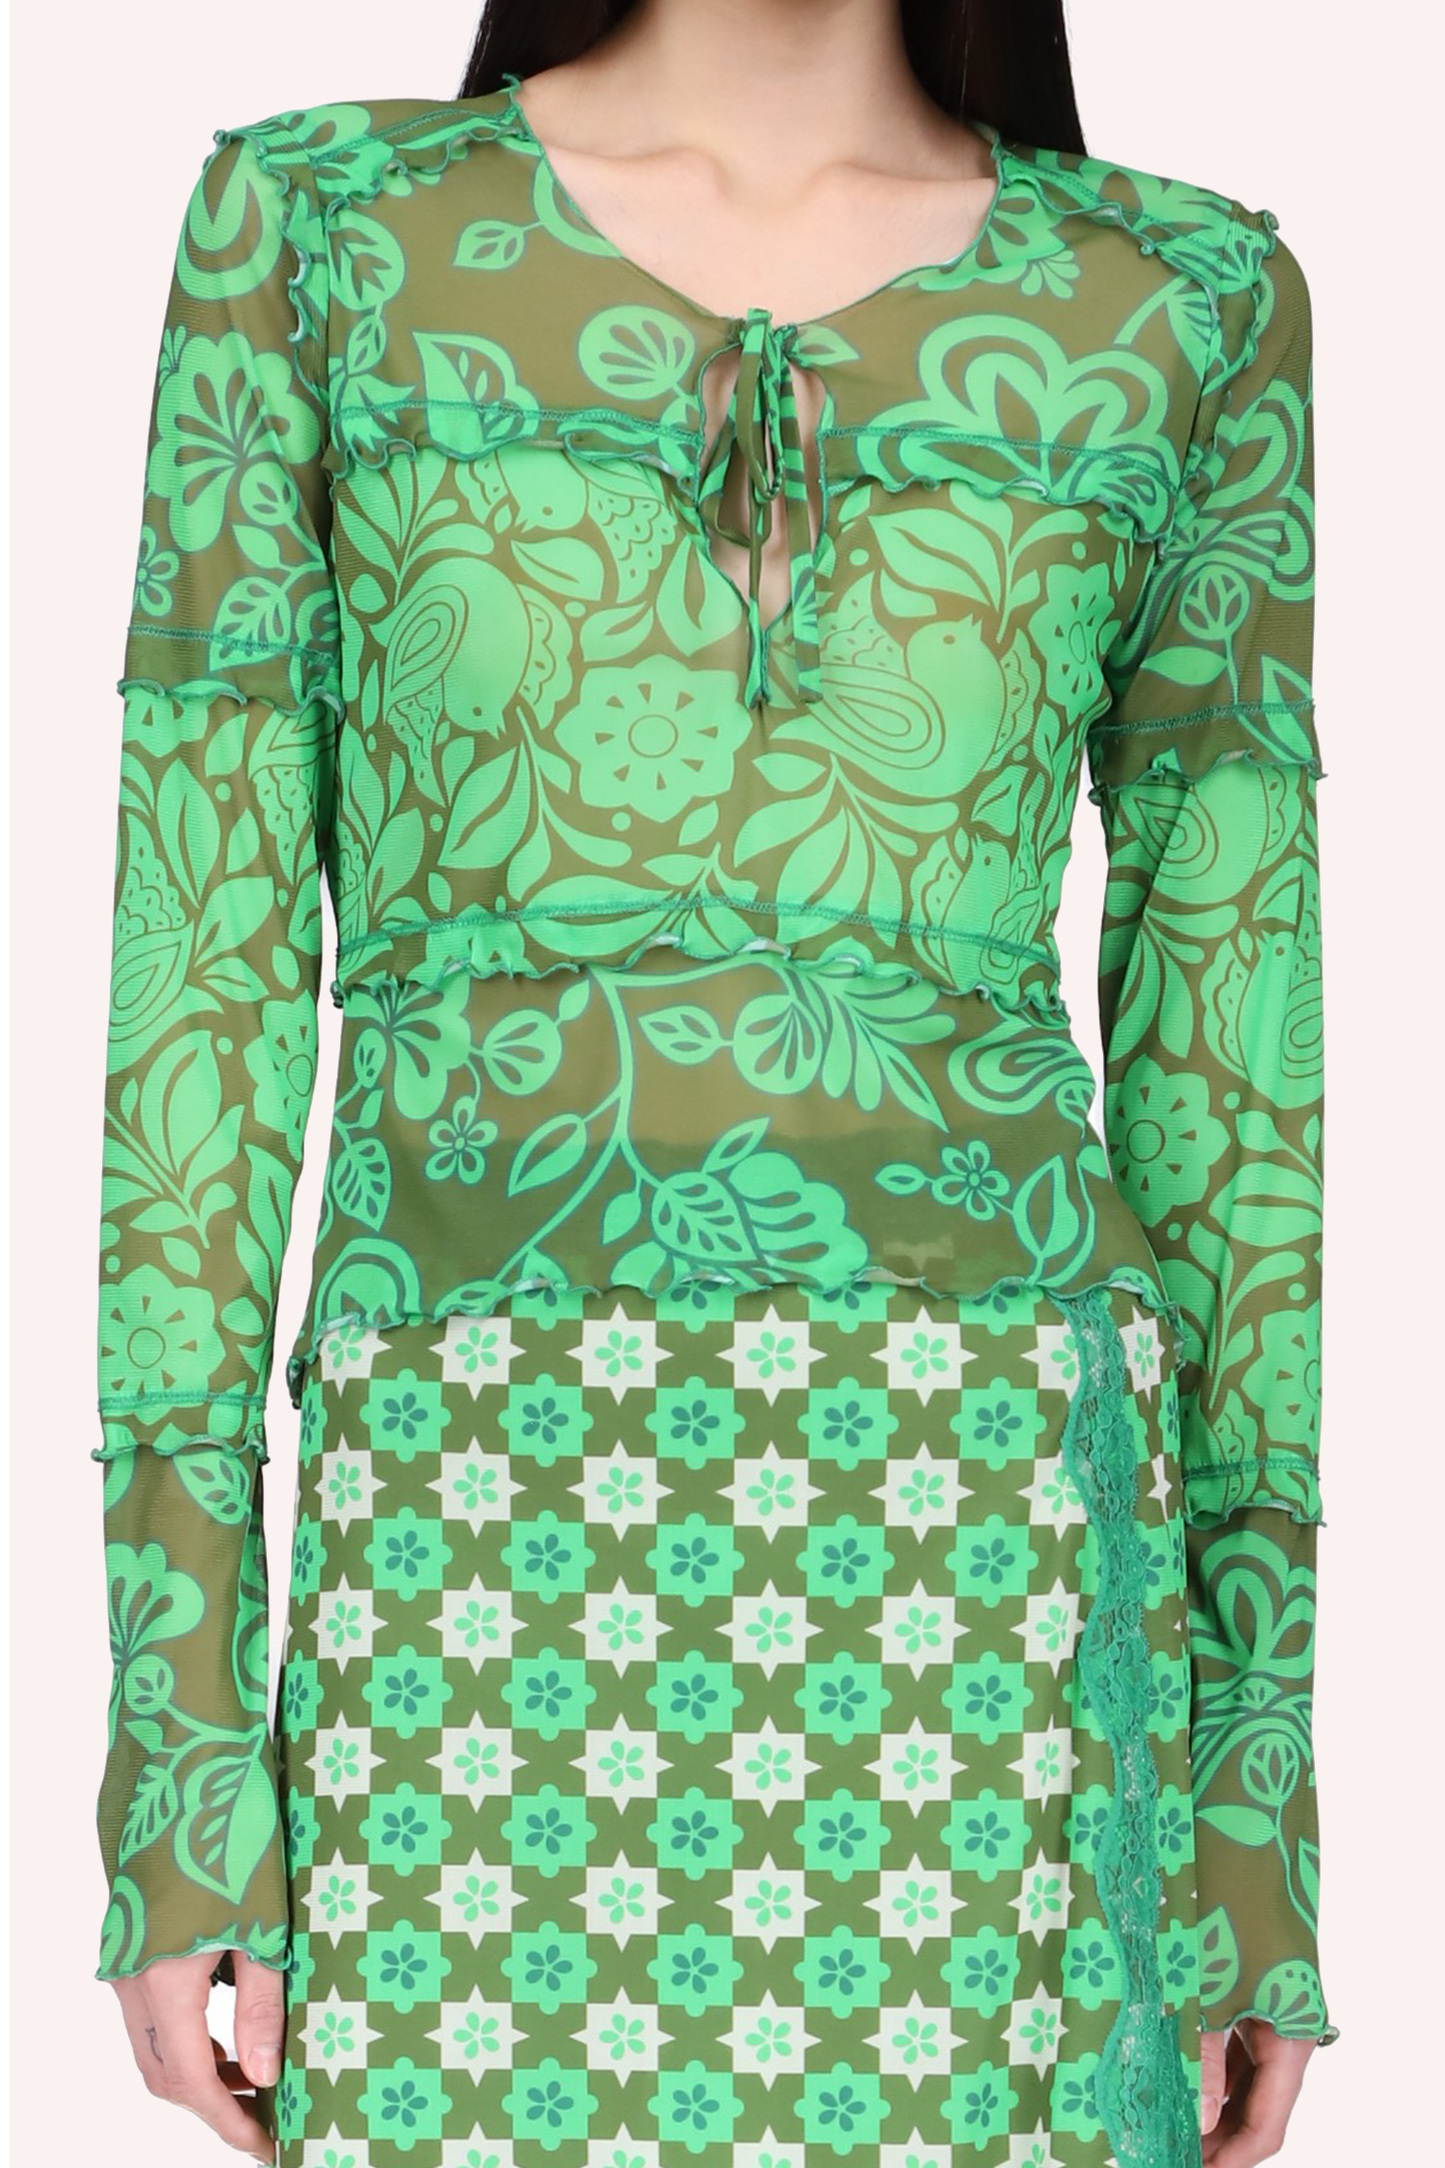 Top is glo green, long sleeves, floral design on transparent mesh, ribbon knot to close the V-collar